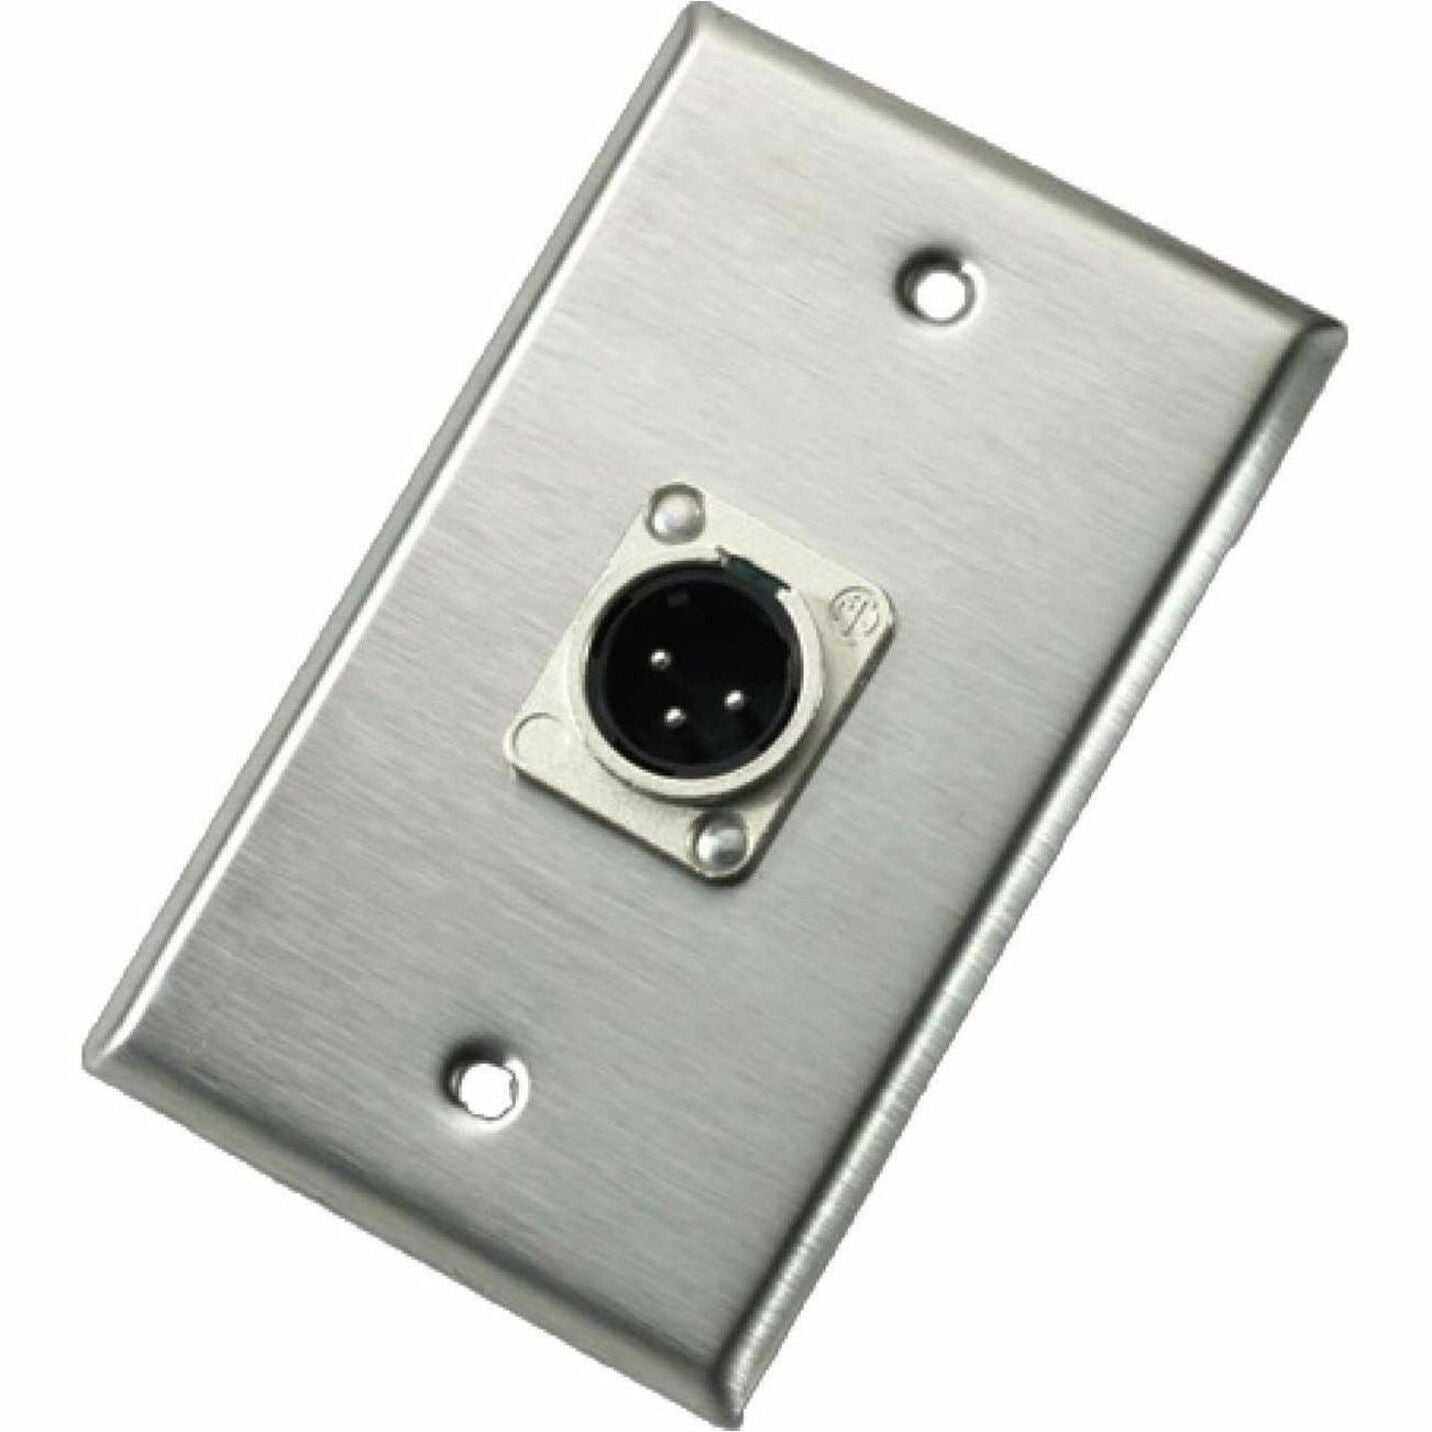 Neutrik 103M Single Gang Wallplate with One NC3MD-L-1 Receptacle, Stainless Steel